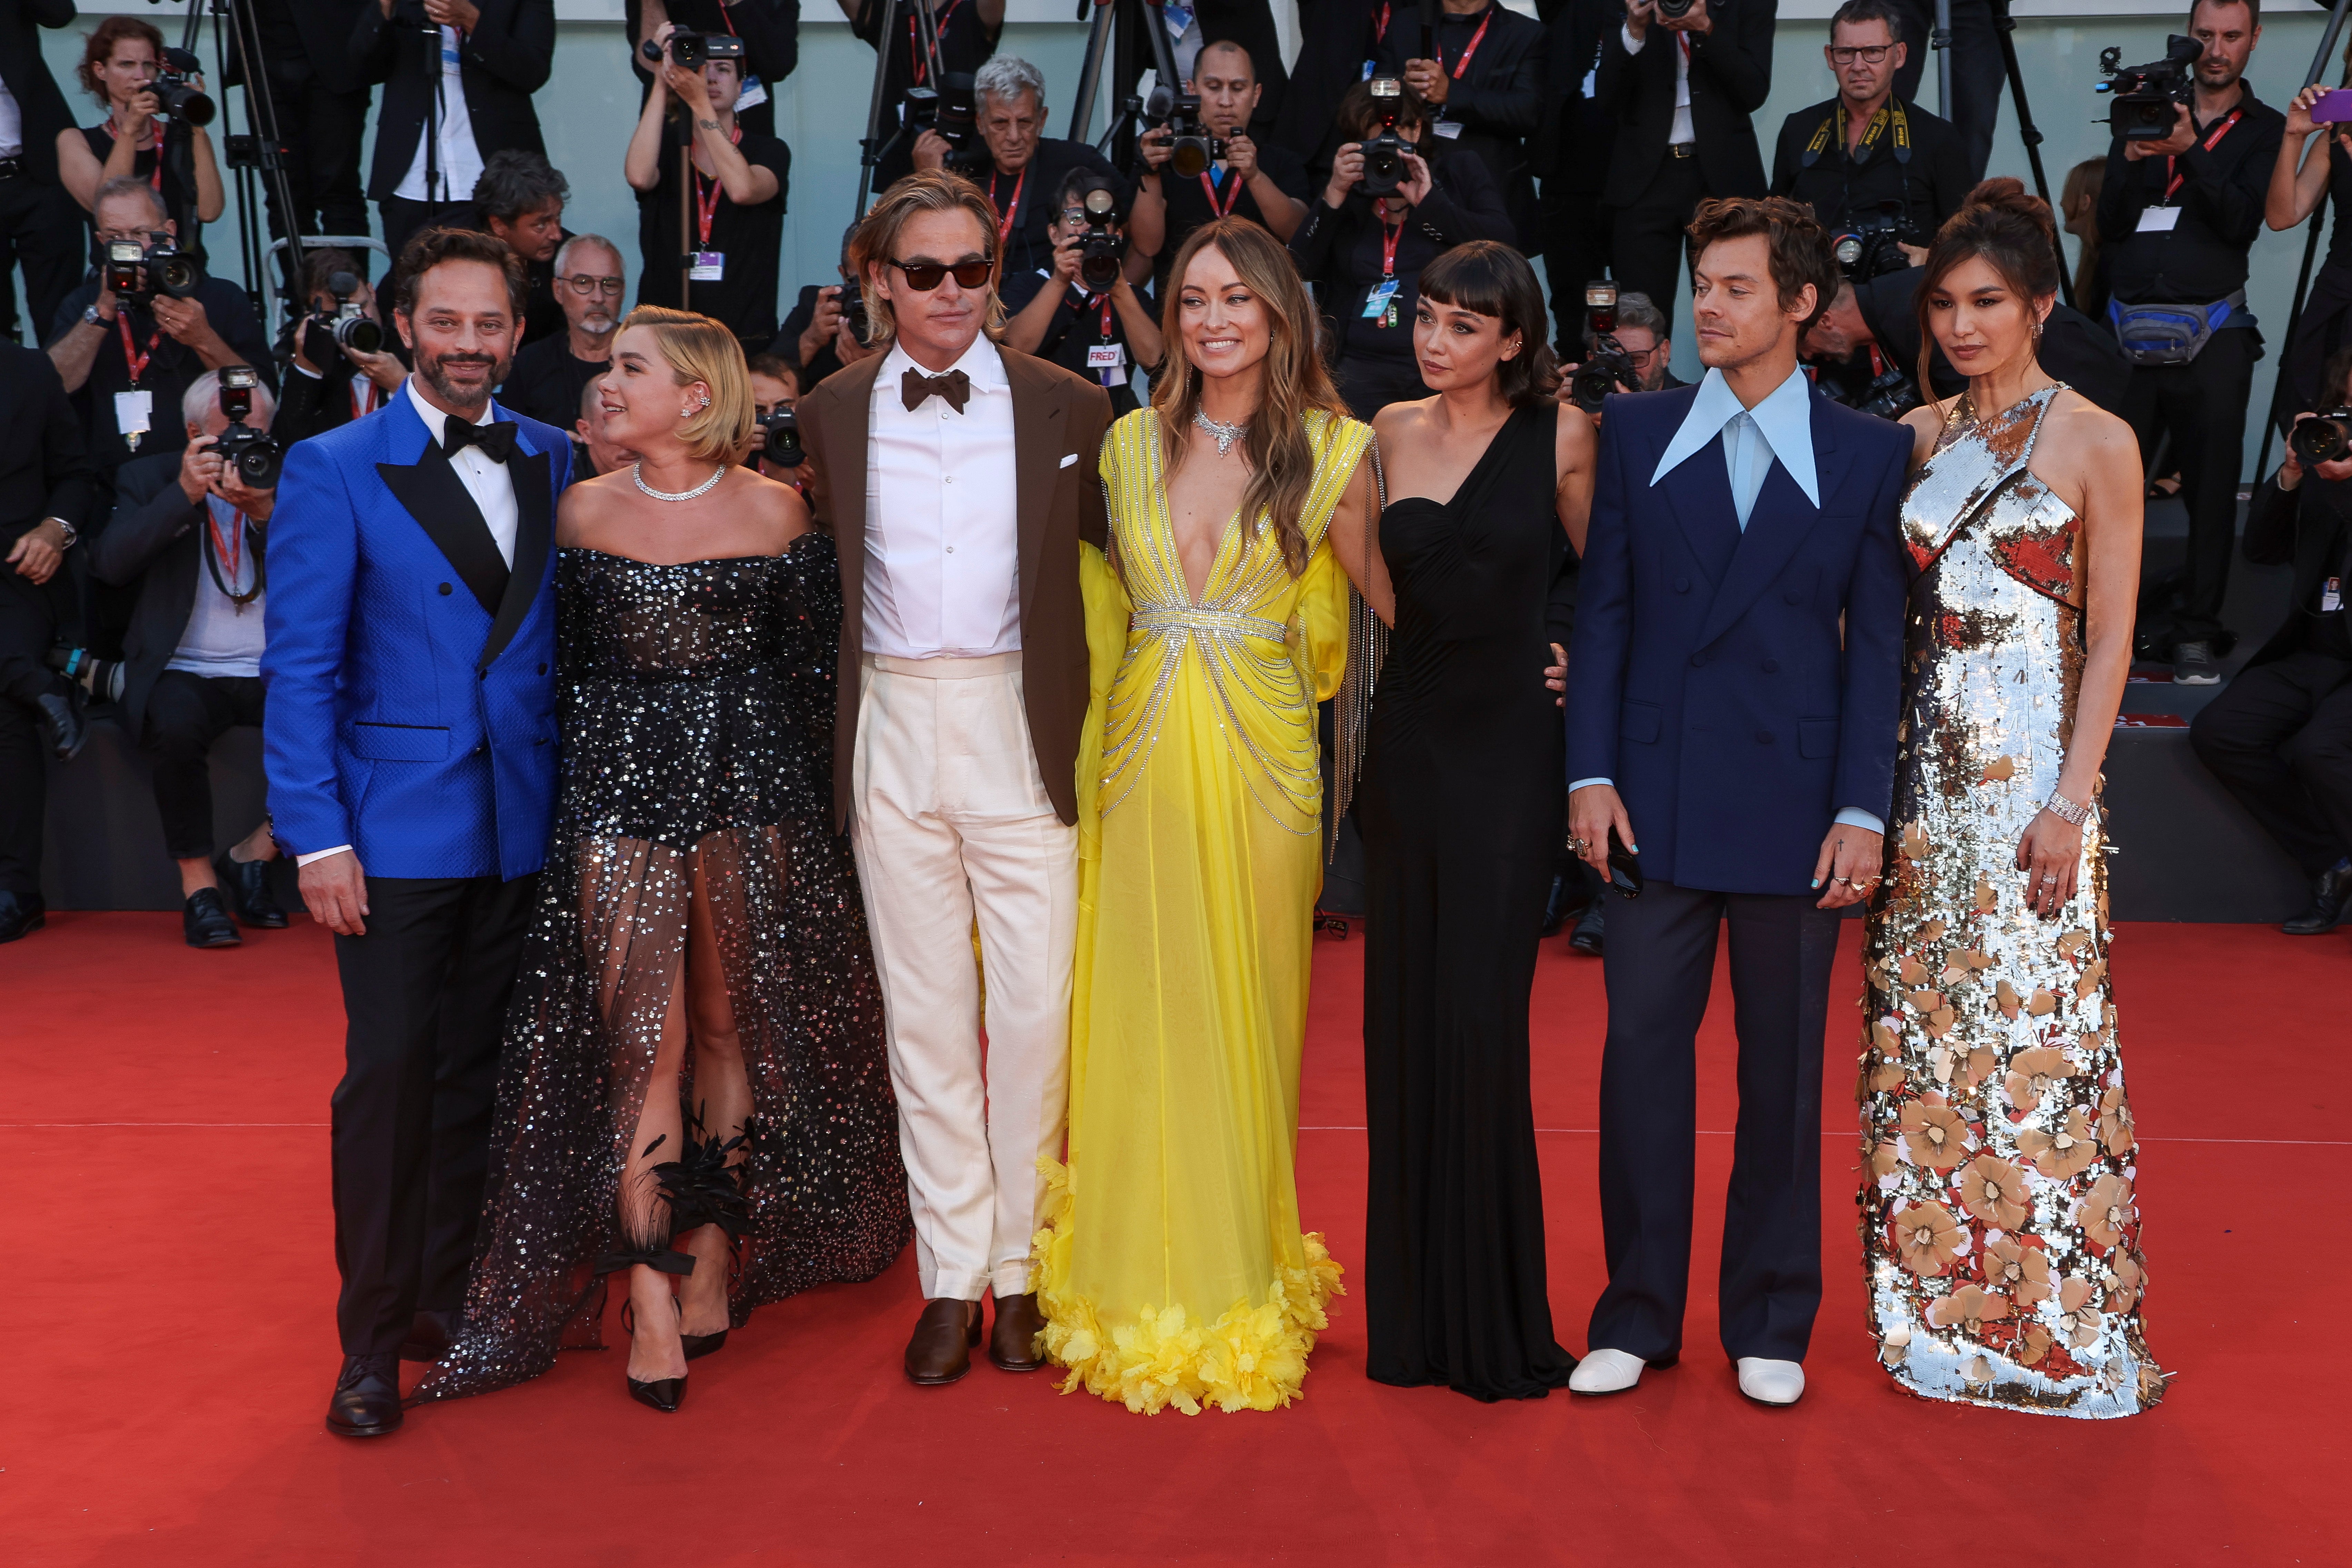 The ‘Don’t Worry Darling’ cast and director Olivia Wilde at the Venice Film Festival premiere